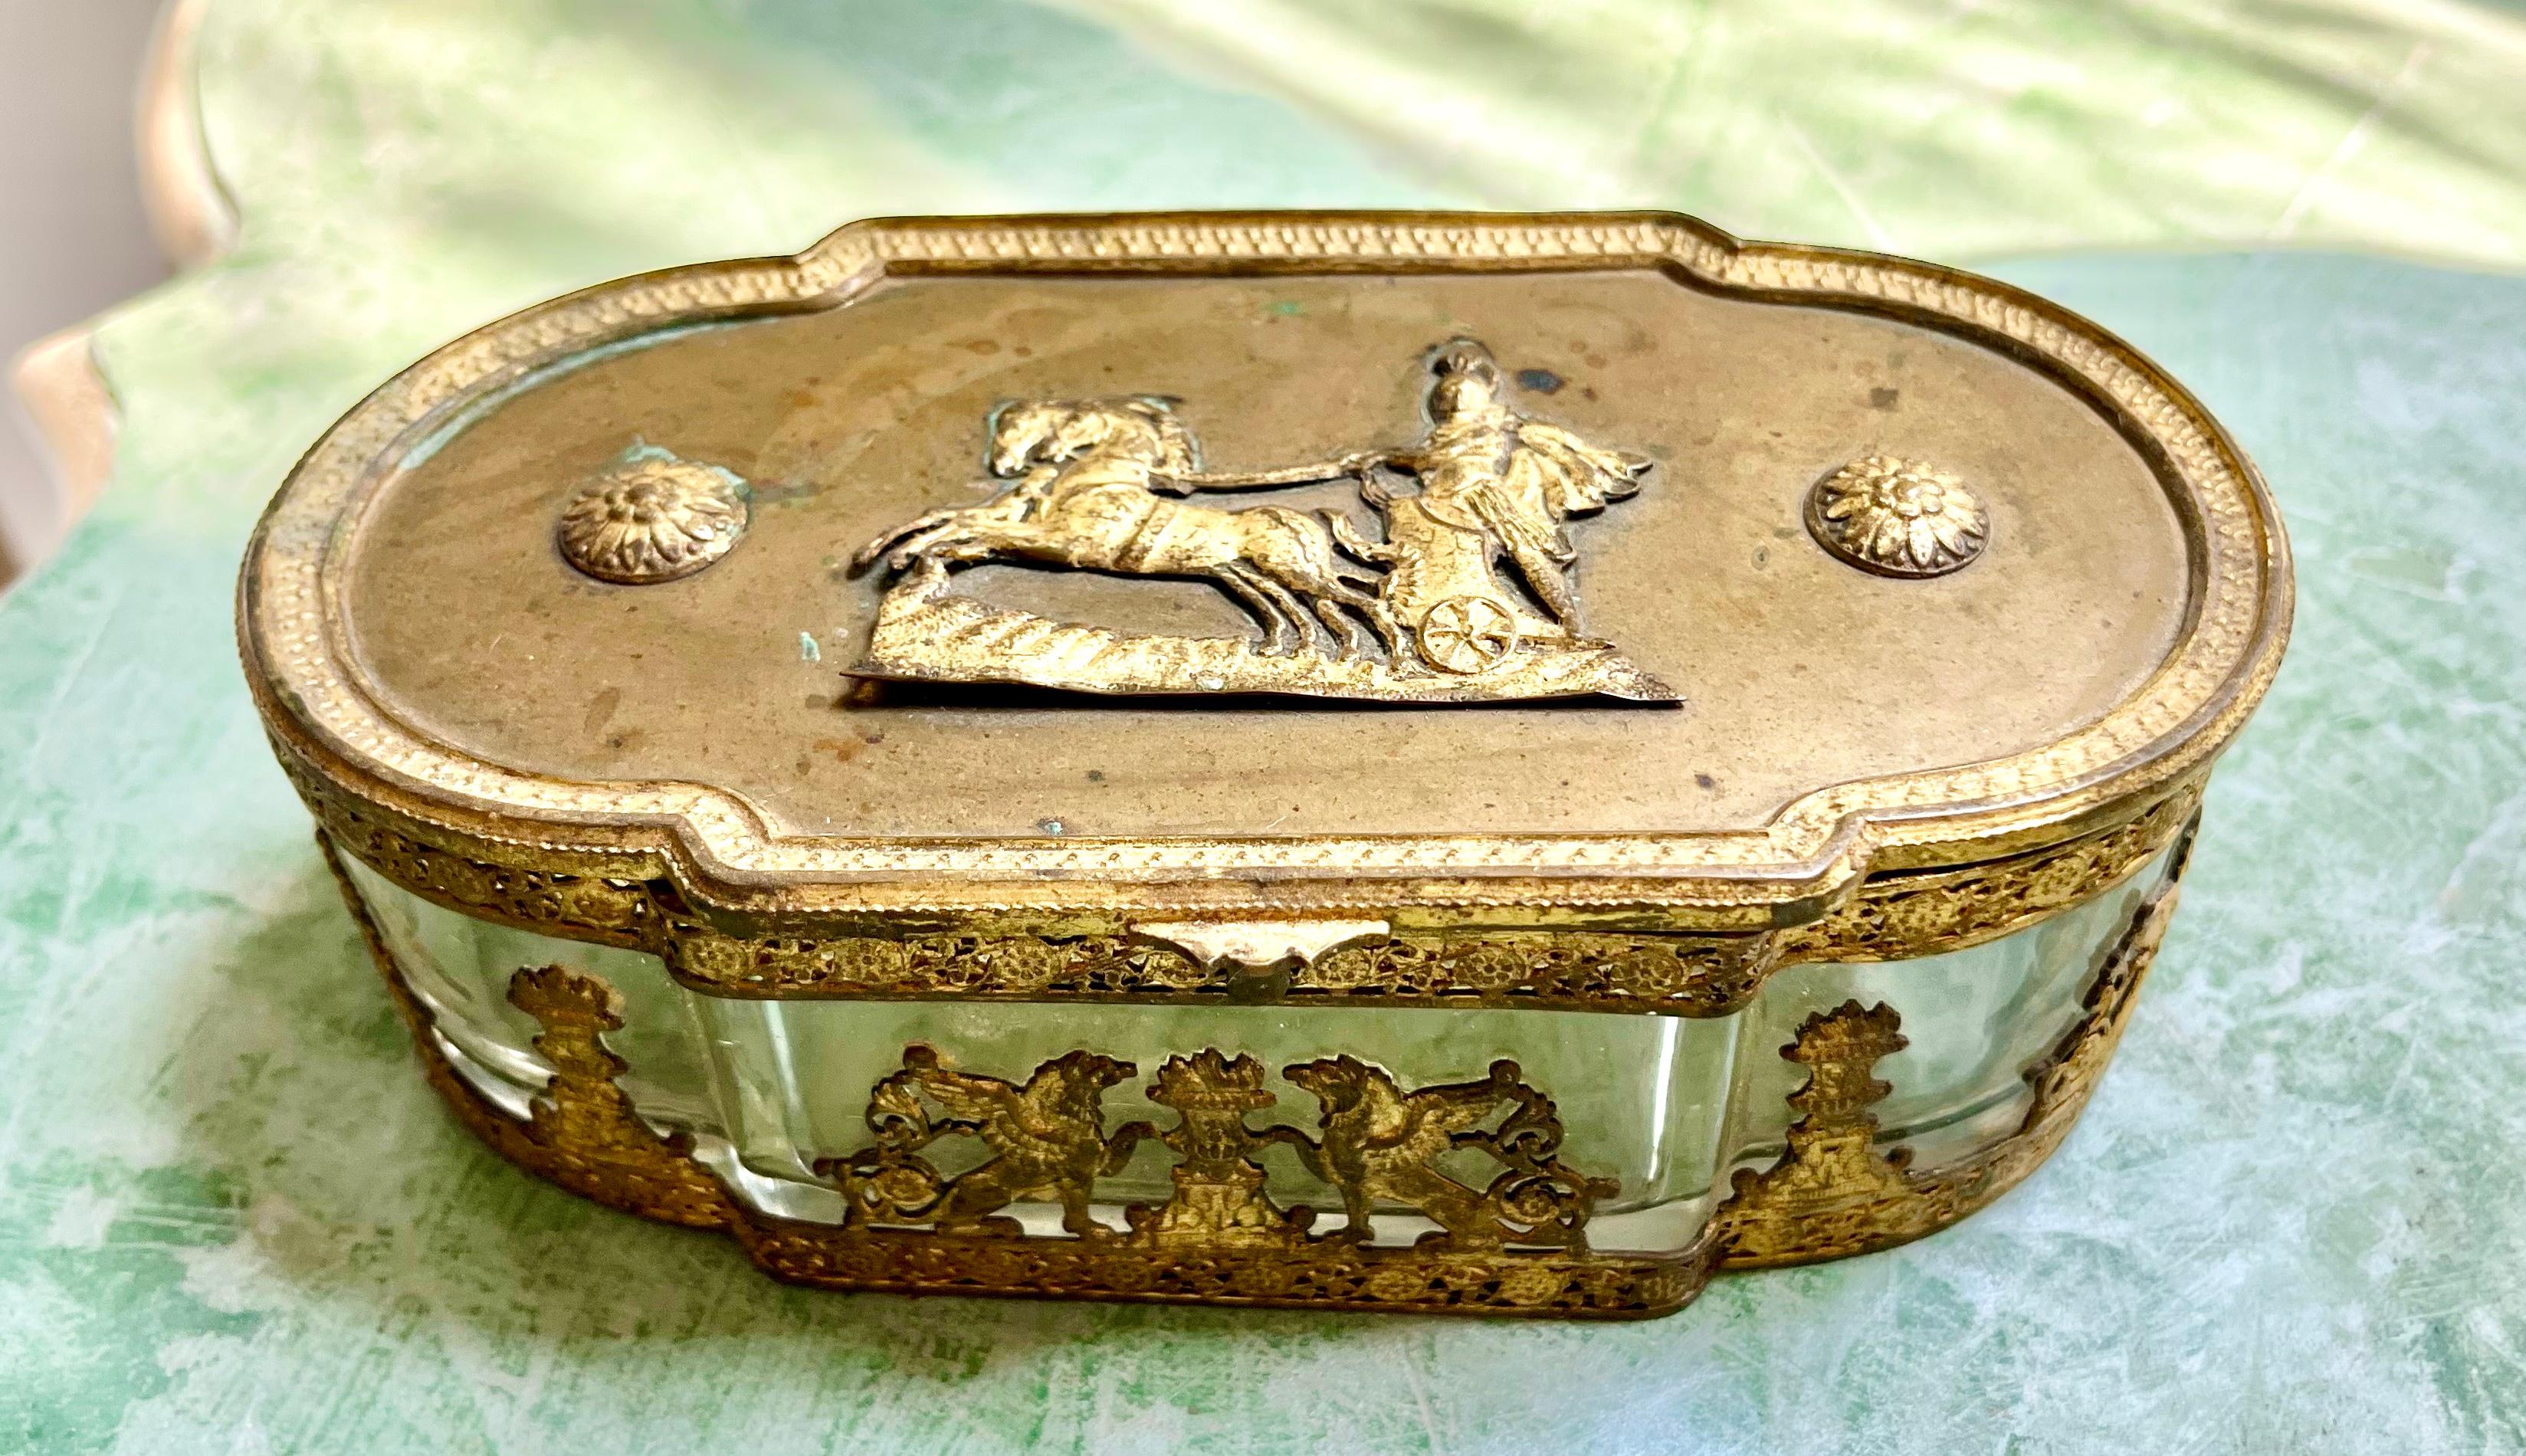 The box a trinket or bon-bon box , adorned with bronze lid and Apollo in his sunburst adorned chariot , the sides with griffins , floral urns .

Most likely and expensive gift or souvenir at the time of creation it is in original unaltered ,